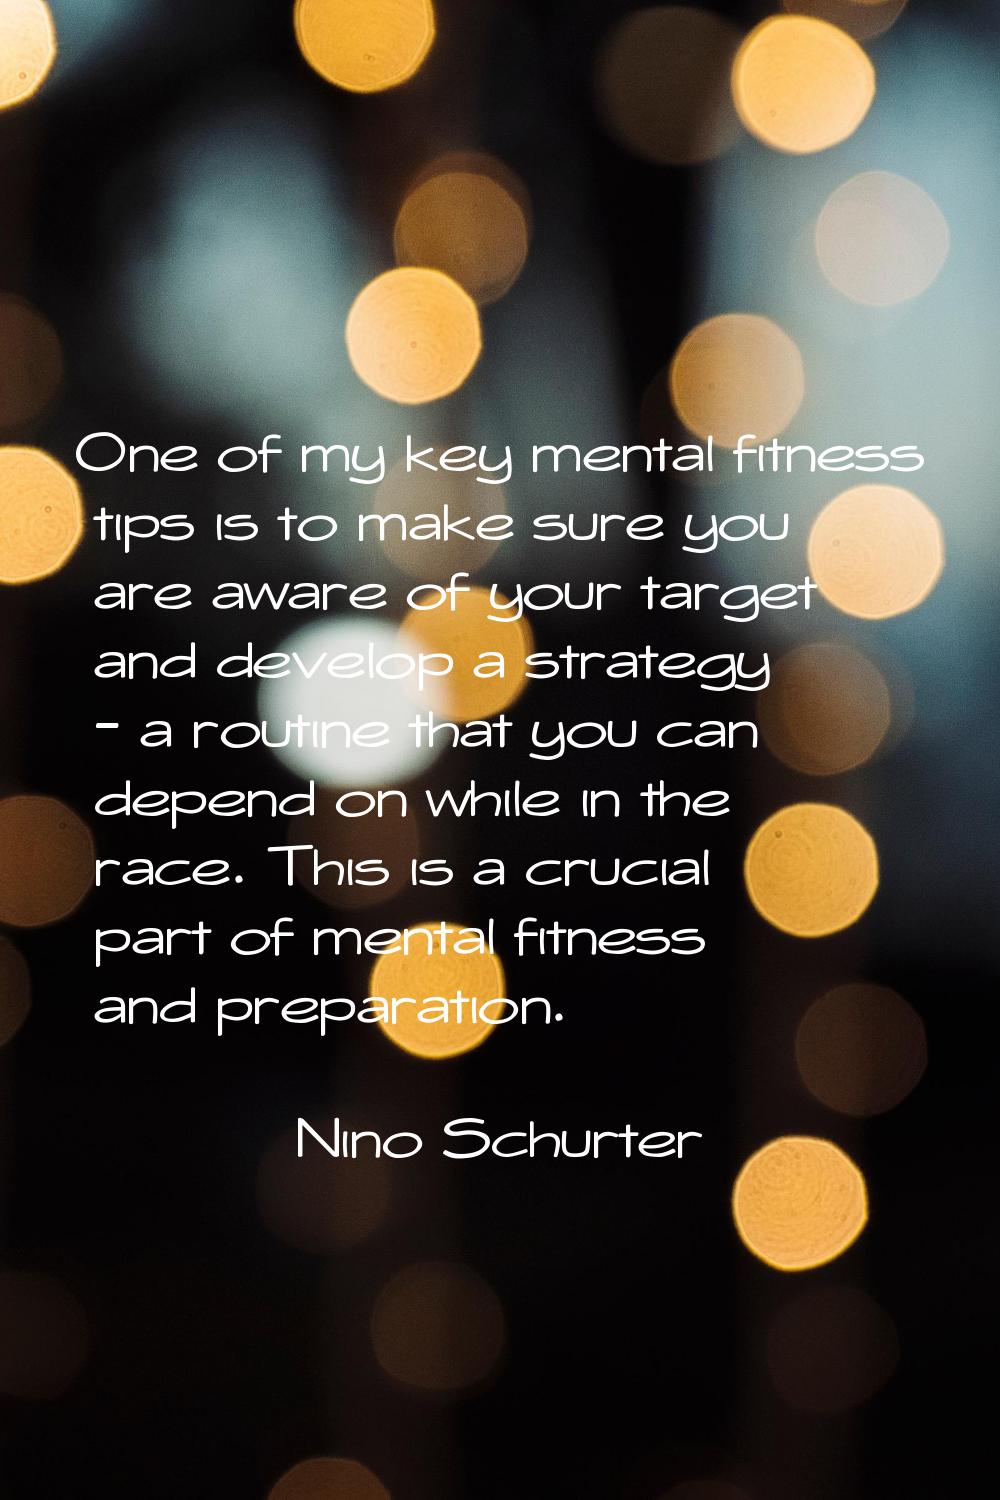 One of my key mental fitness tips is to make sure you are aware of your target and develop a strate